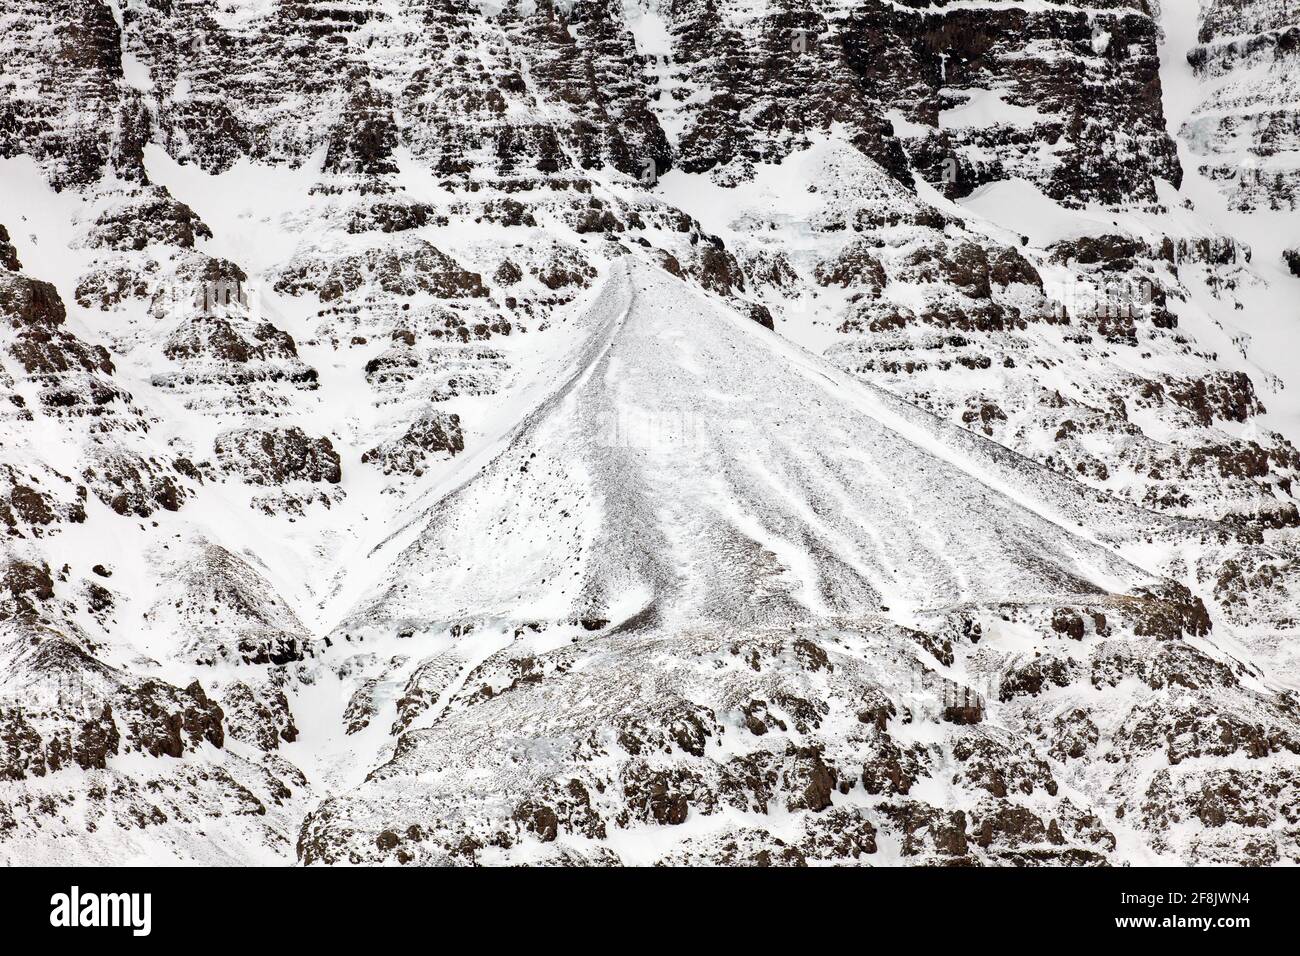 Snow covered talus cone and scree, stony deposit at base of mountain slope in winter at Snaefellsnes, western Iceland Stock Photo